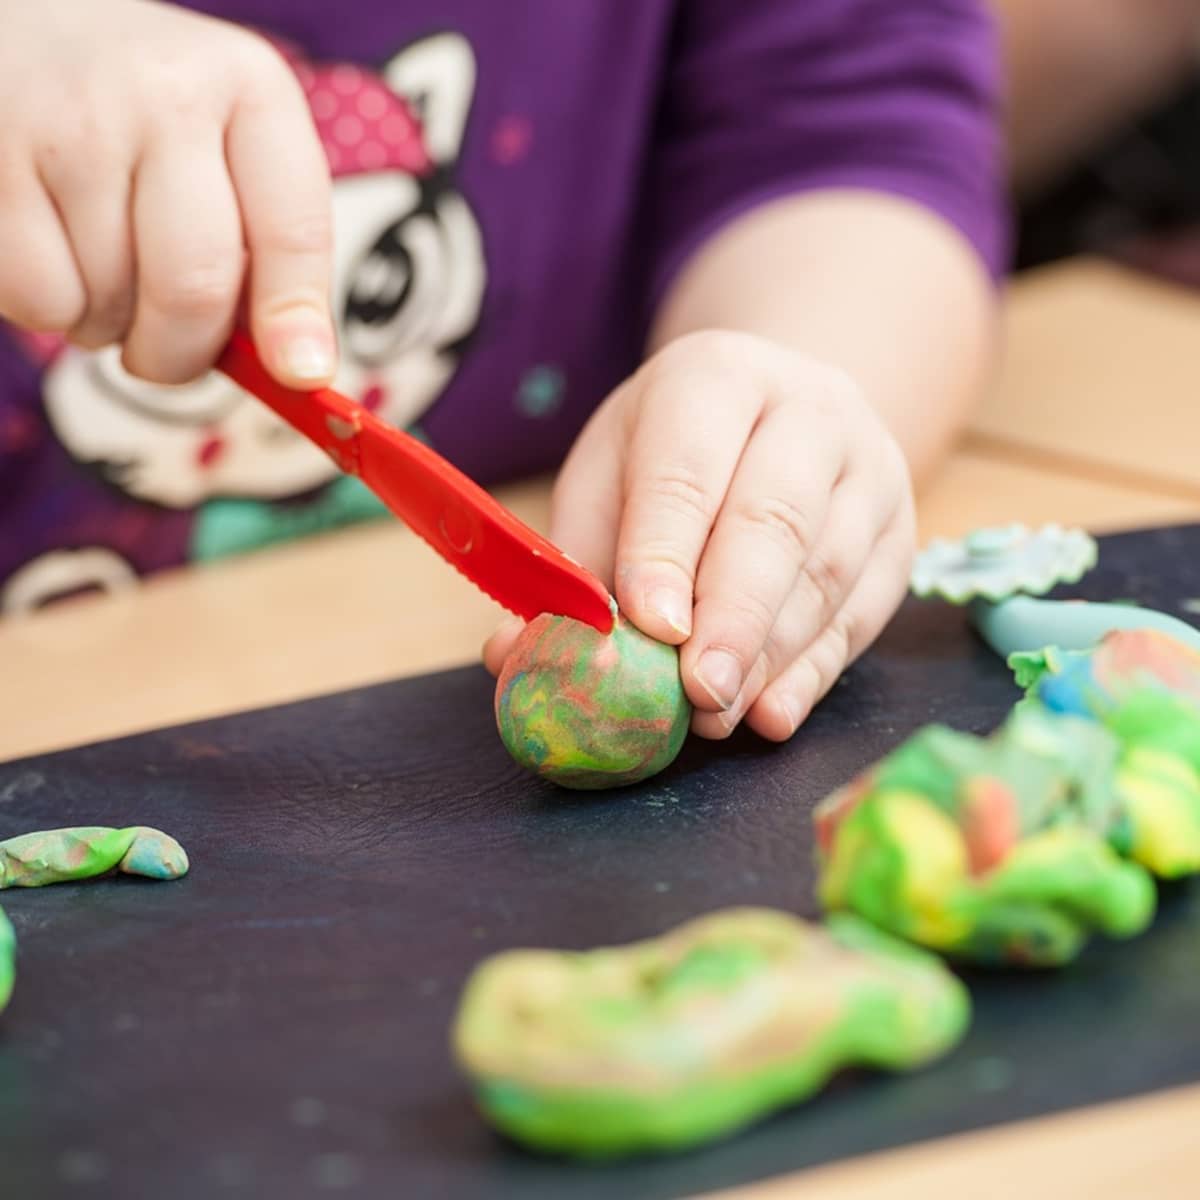 Bring Your Child's Dried Out Play-Doh Back to Life With This Hack